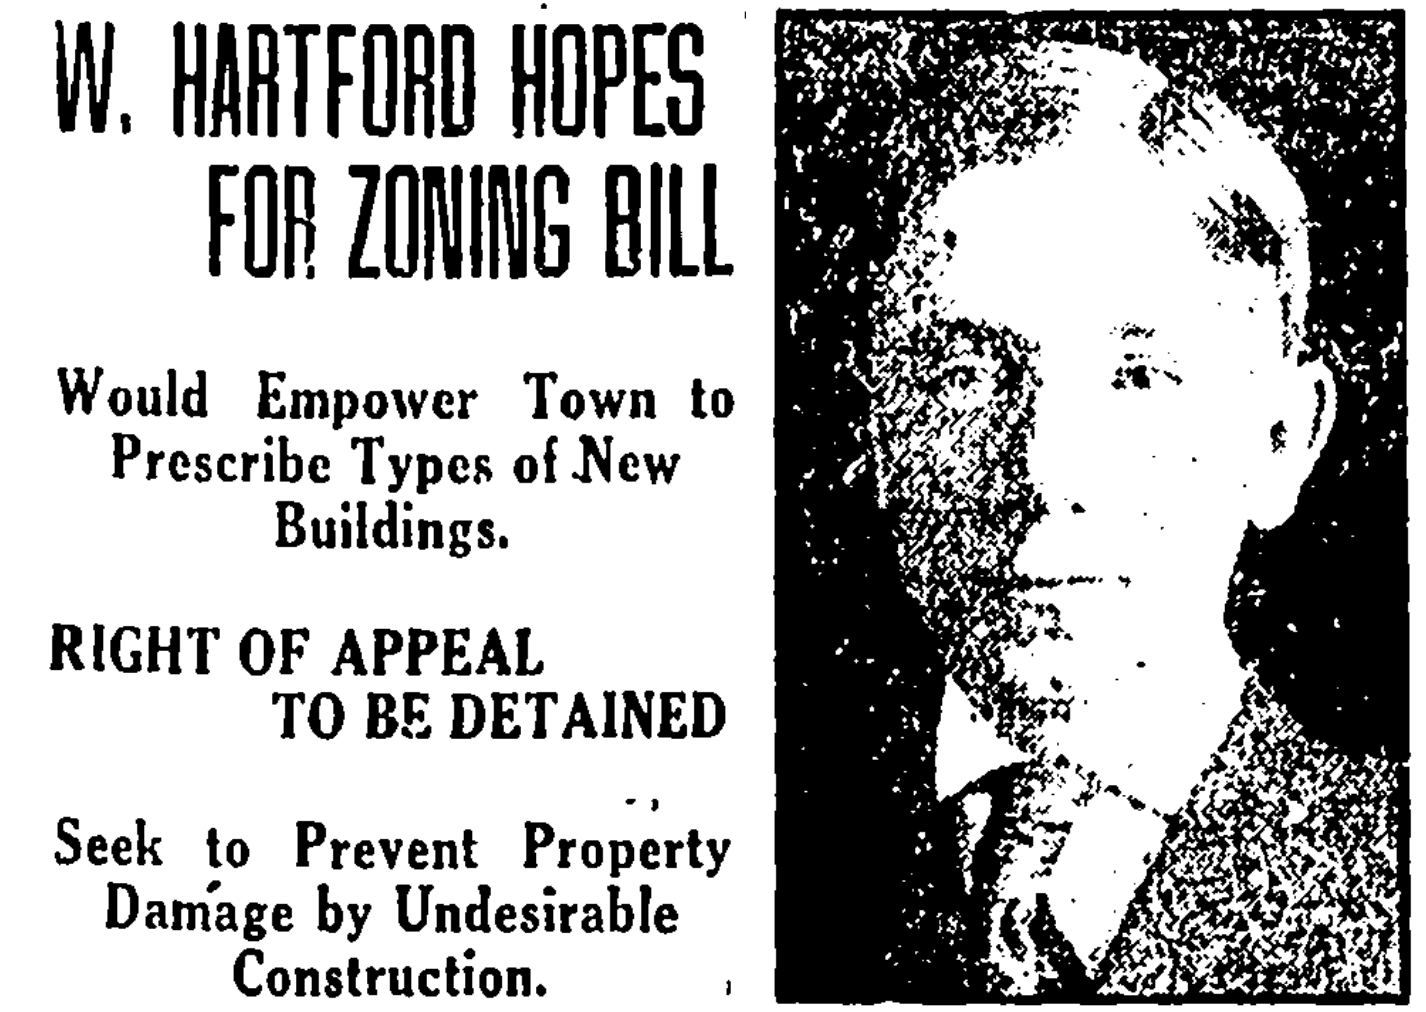 Josiah B. Woods, West Hartford town councilman and zoning committee chair, appeared prominently in newspaper coverage in support of Connecticut’s zoning enabling act. Source: Hartford Courant, March 13, 1923.